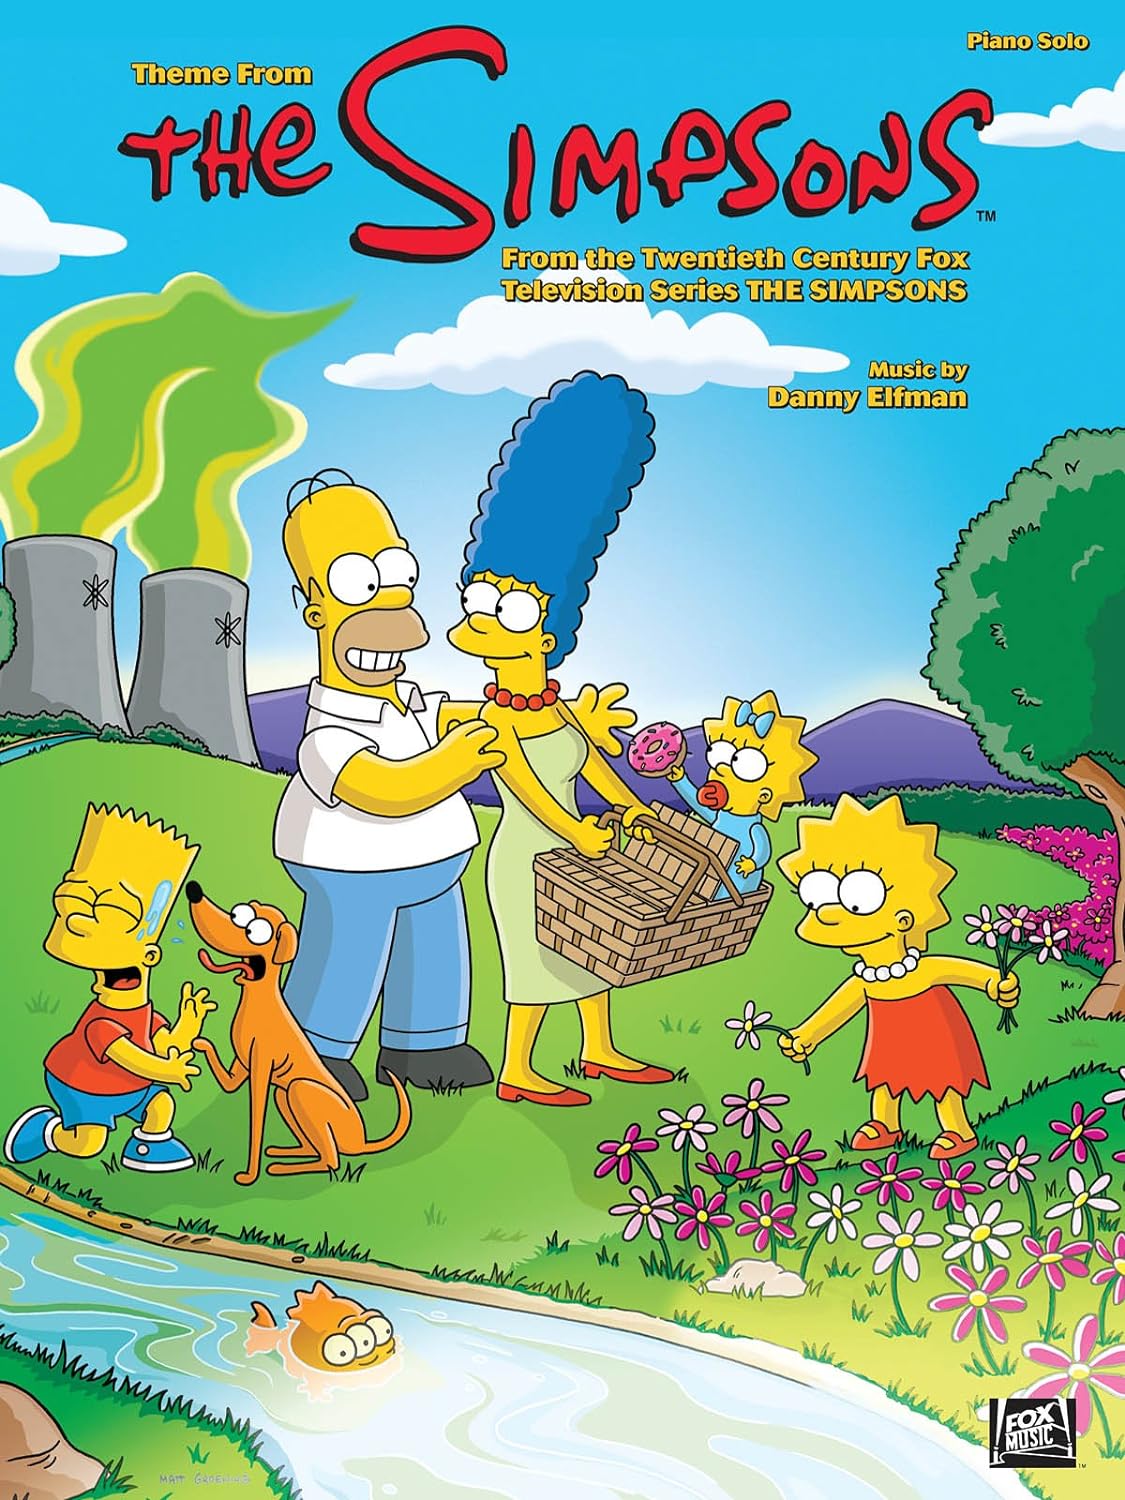 Simpsons Theme by Danny Elfman